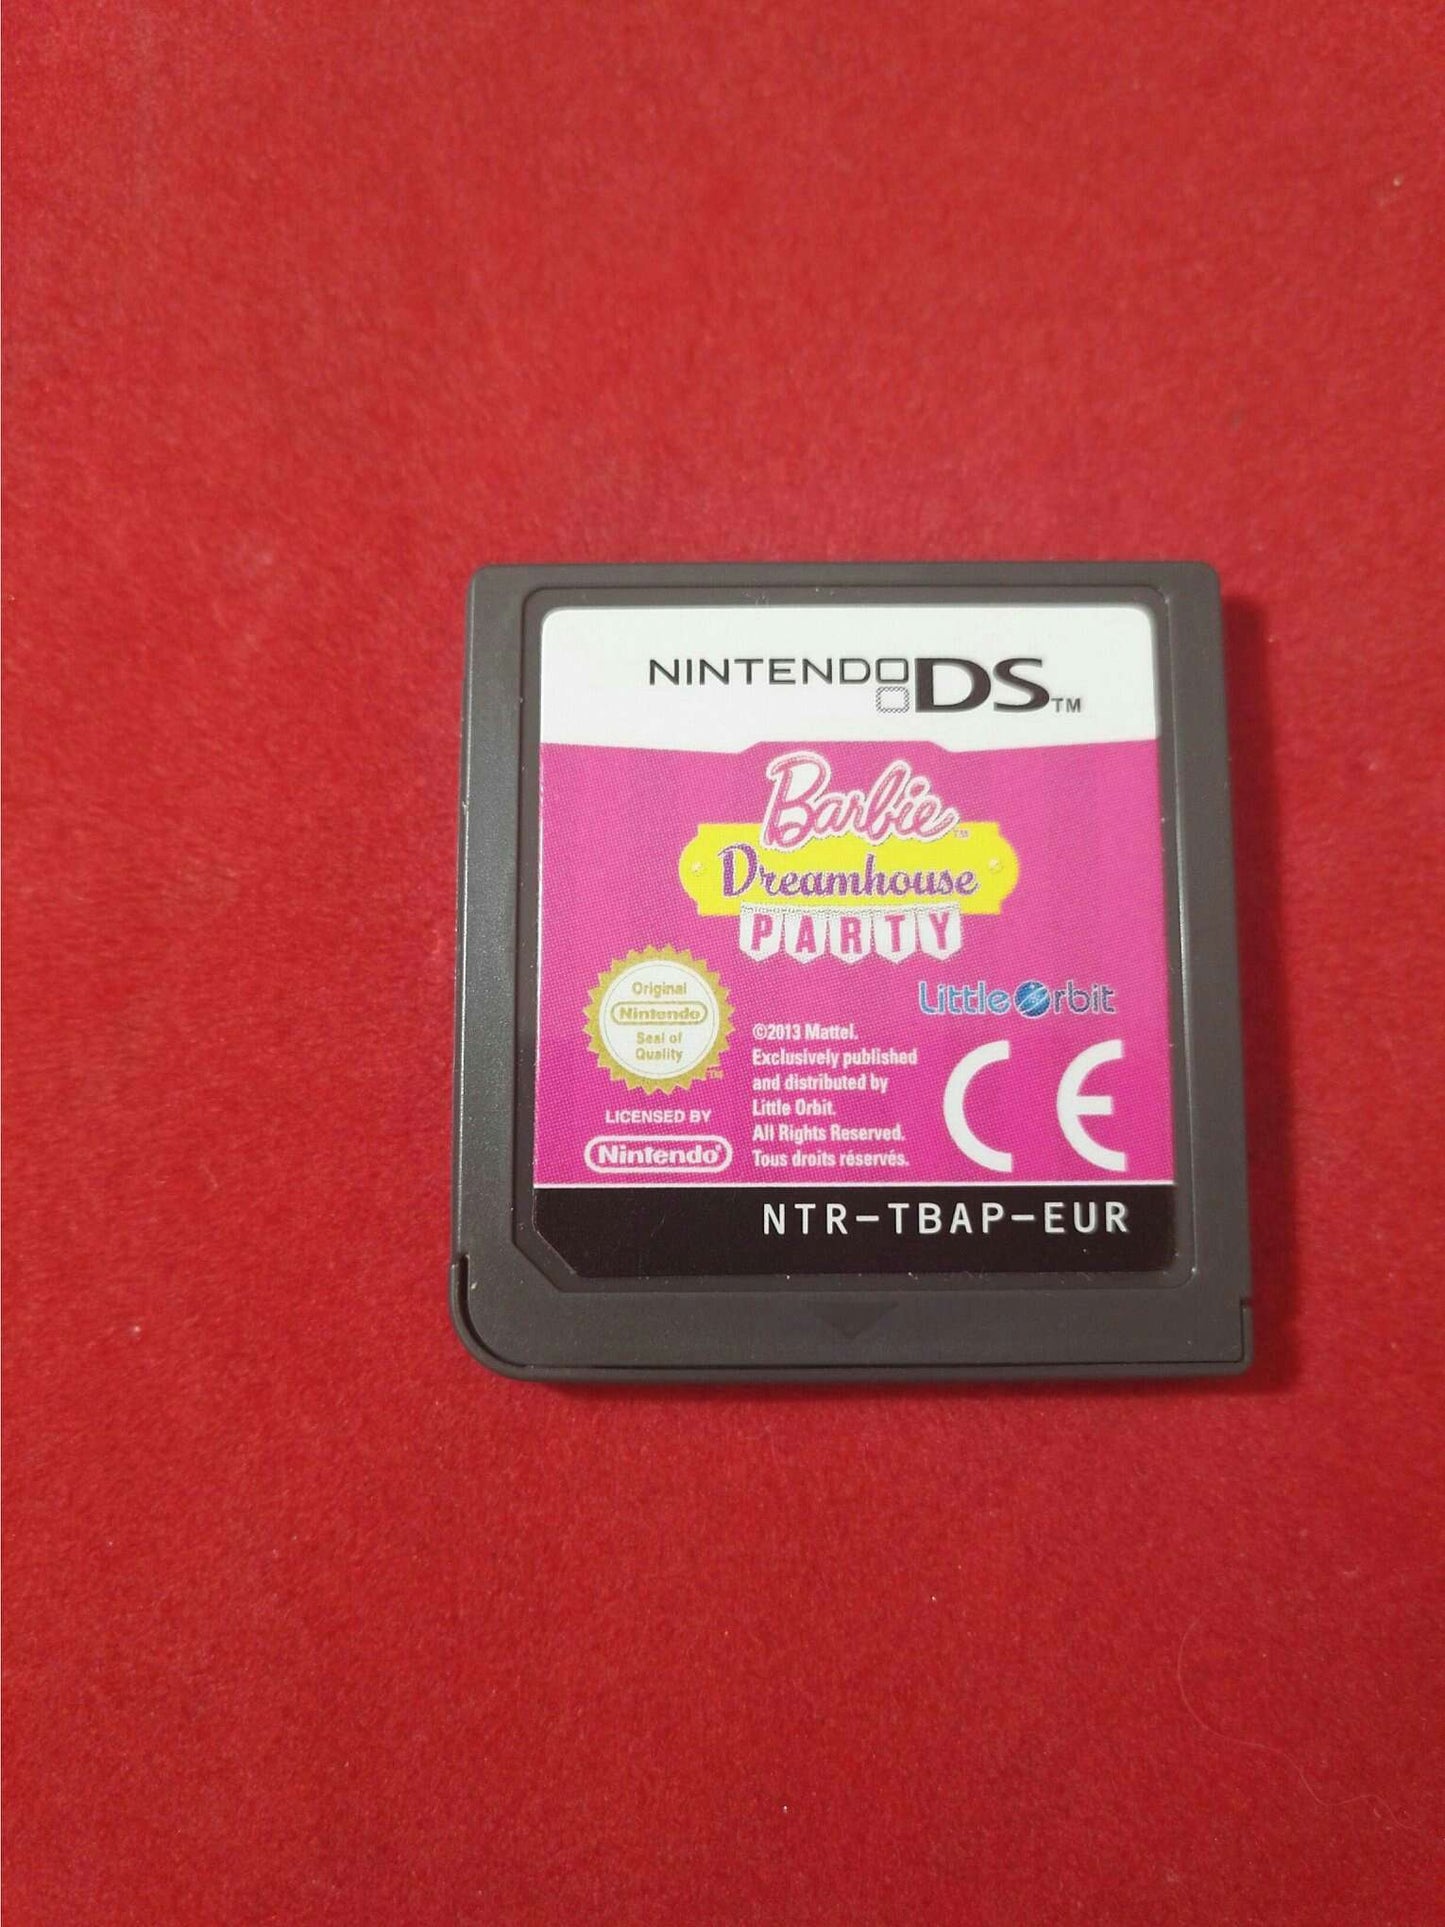 Barbie Dreamhouse Party Nintendo DS Game Cartridge Only